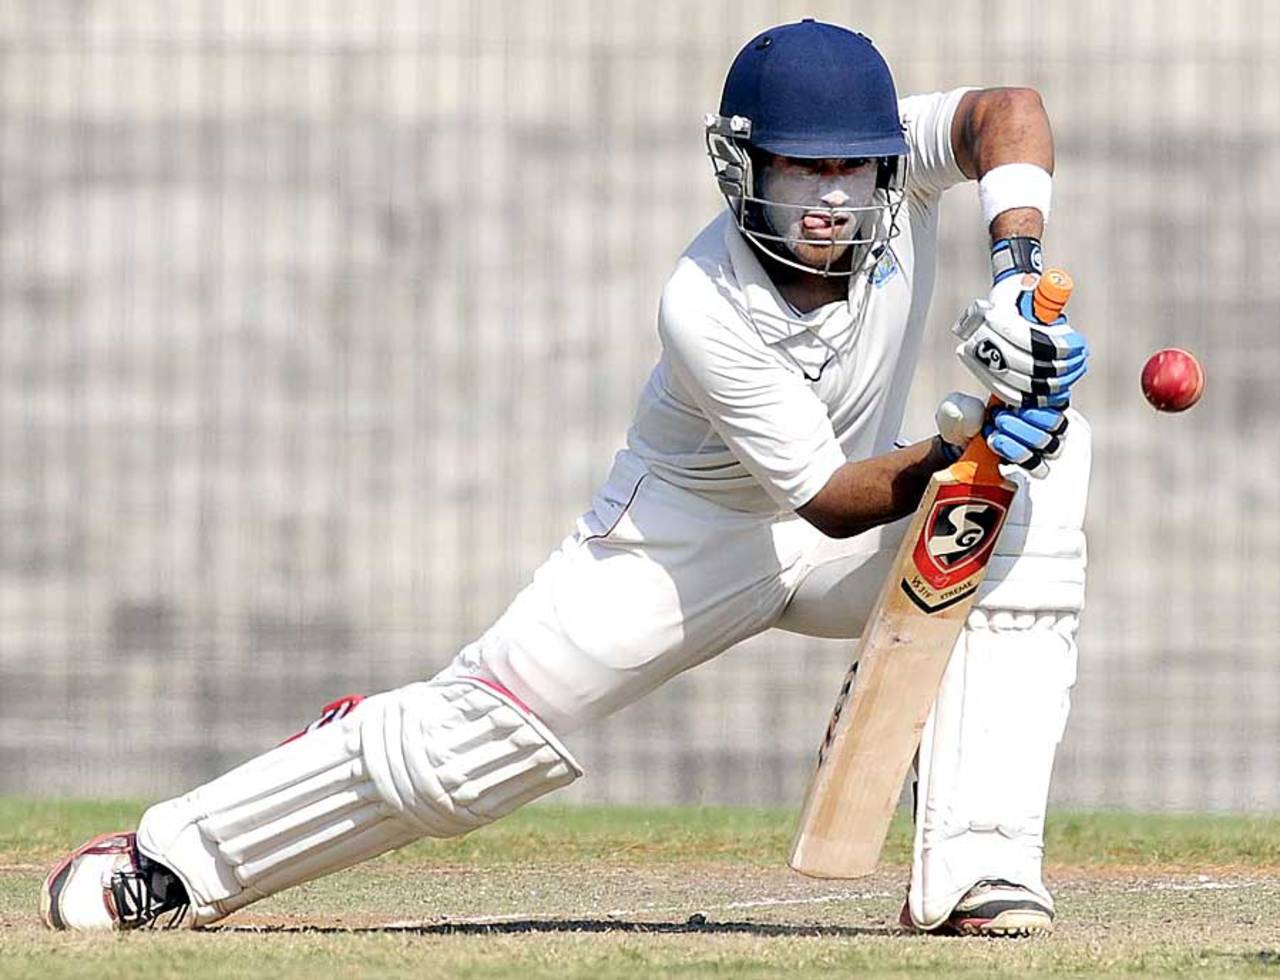 Robin Bist defends, South Zone v Central Zone, Duleep Trophy 2011-12 semi-final, 3rd day, February 6, 2012